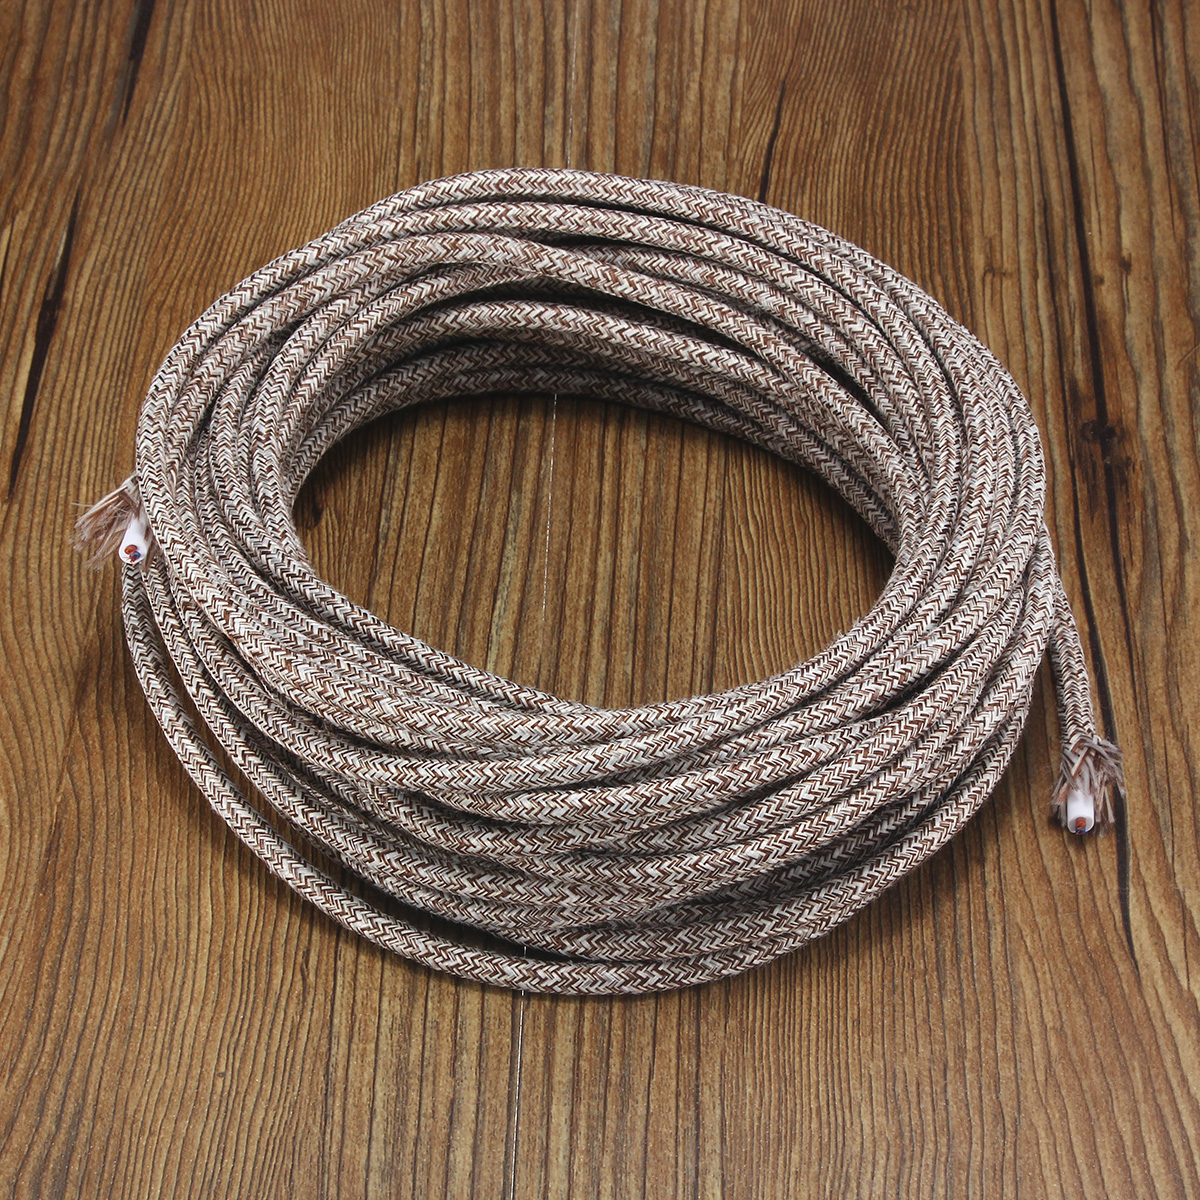 10M-2-Cord-Color-Vintage-Twist-Braided-Fabric-Light-Cable-Electric-Wire-1069140